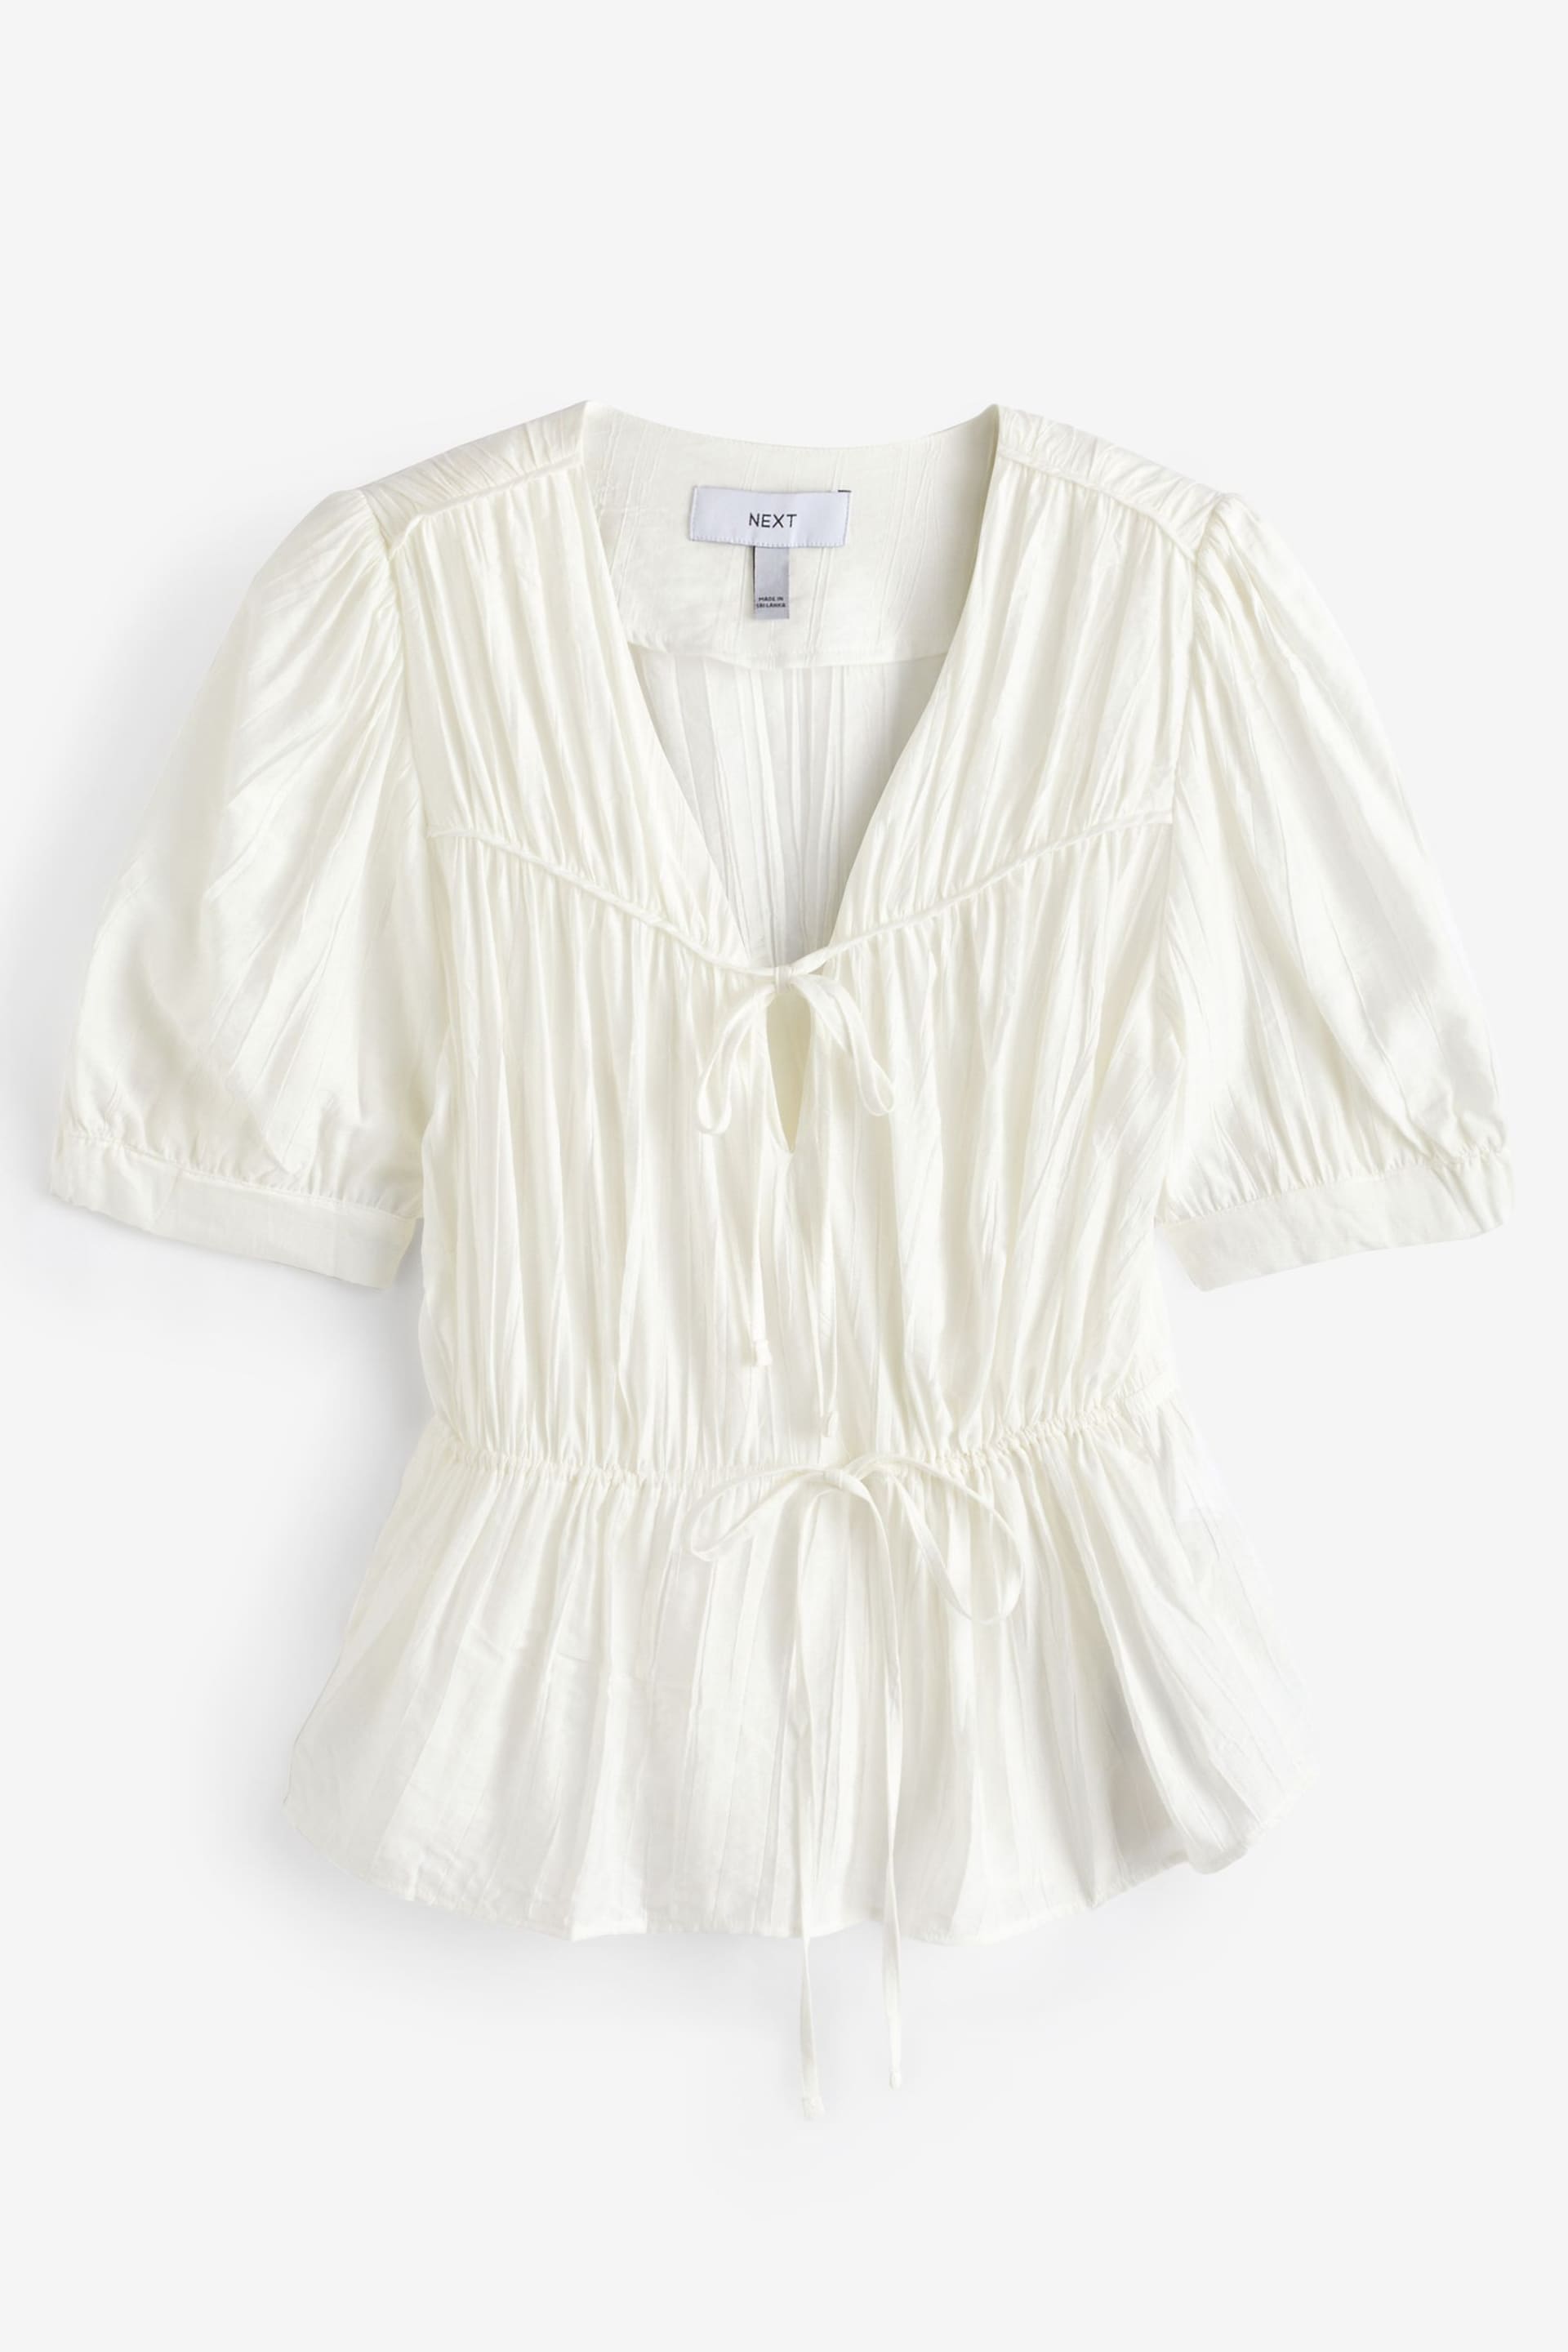 White Tie Front Tiered Textured Short Sleeve Blouse - Image 5 of 6